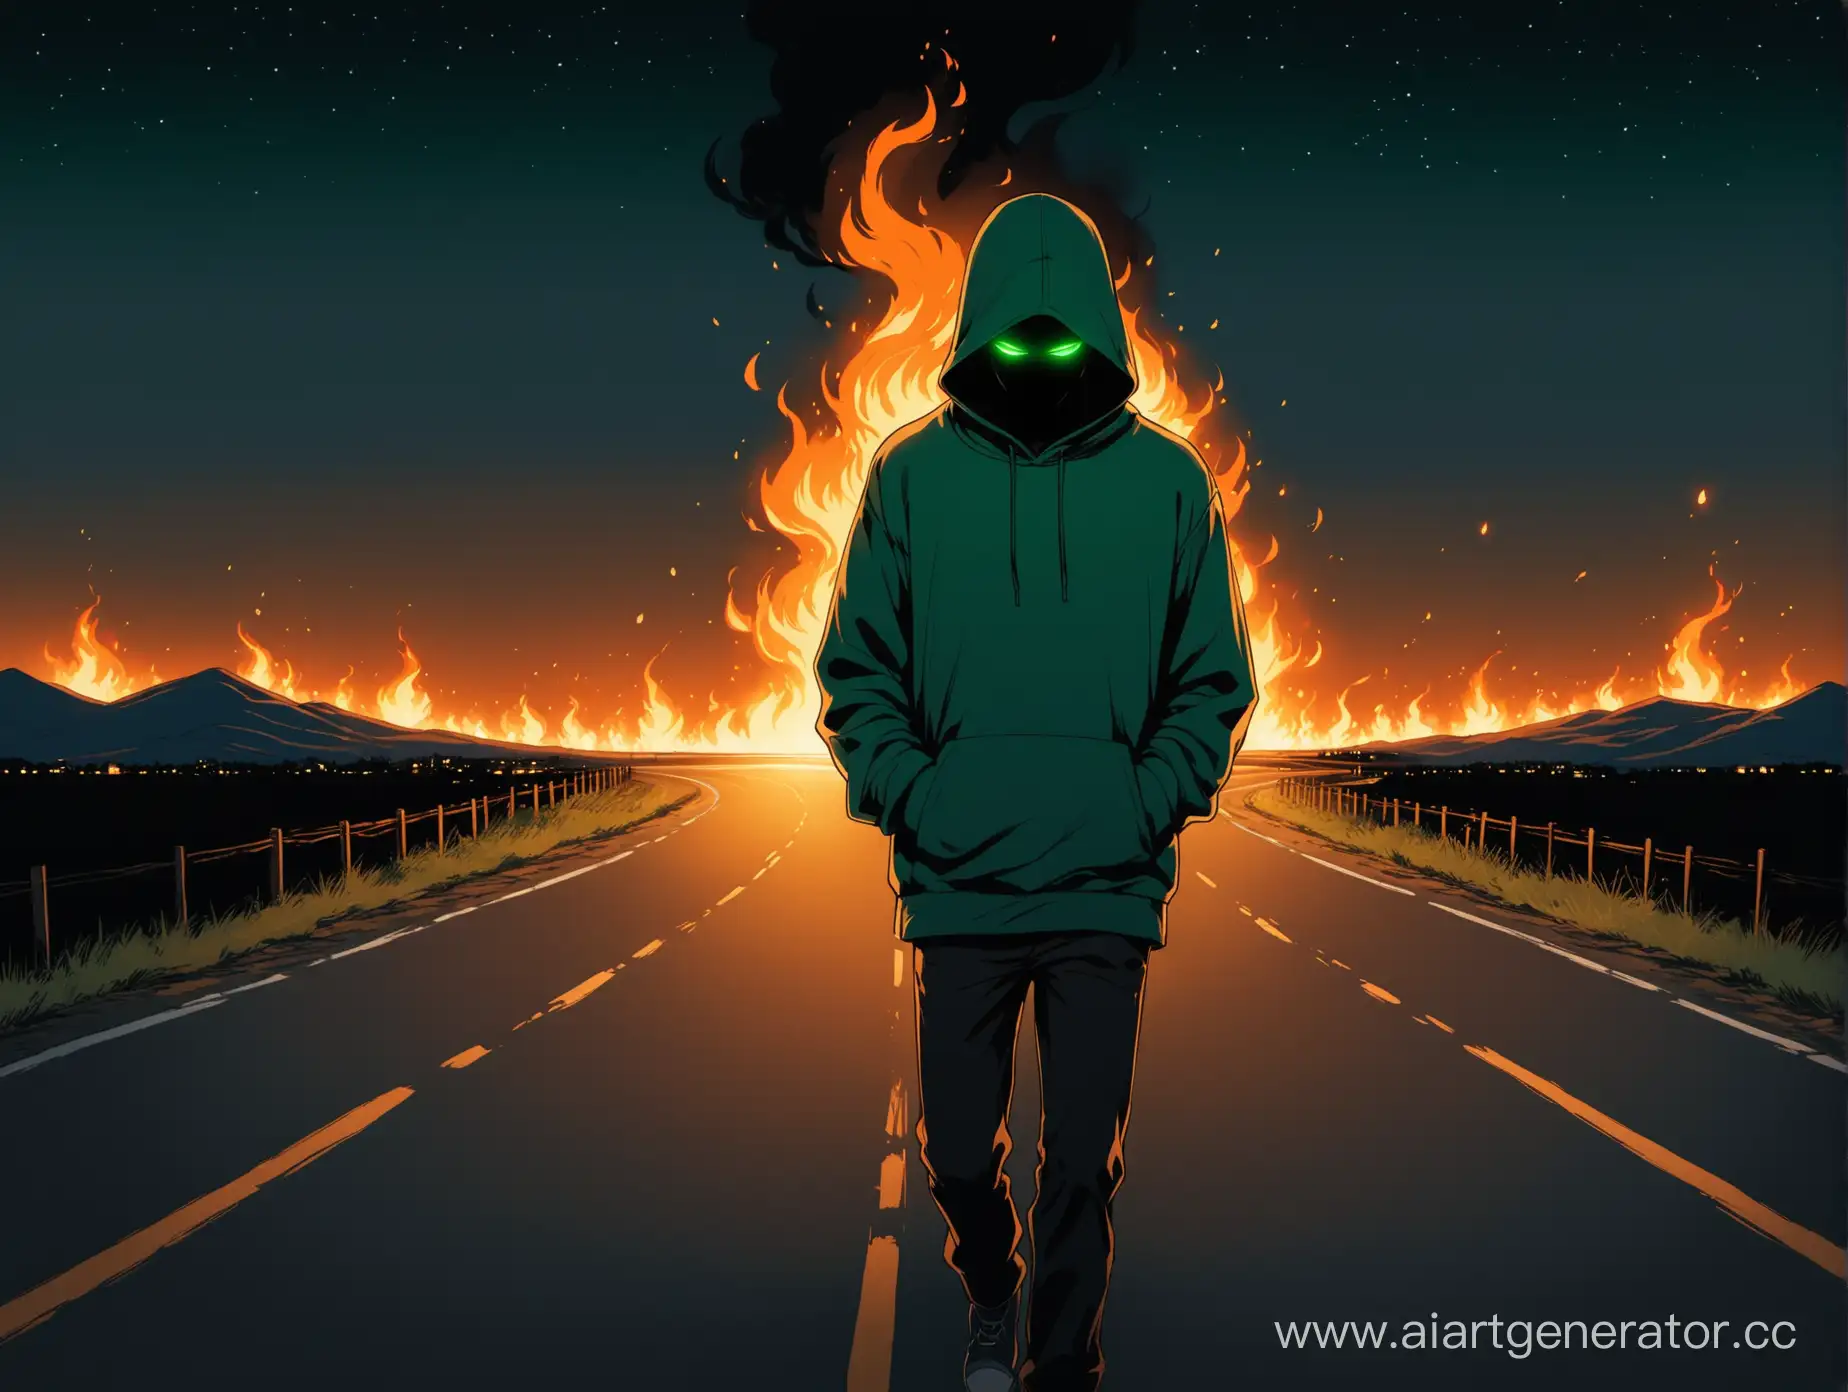 Mysterious-Figure-in-Hoodie-Strolling-on-a-FlameEngulfed-Pathway-at-Dusk